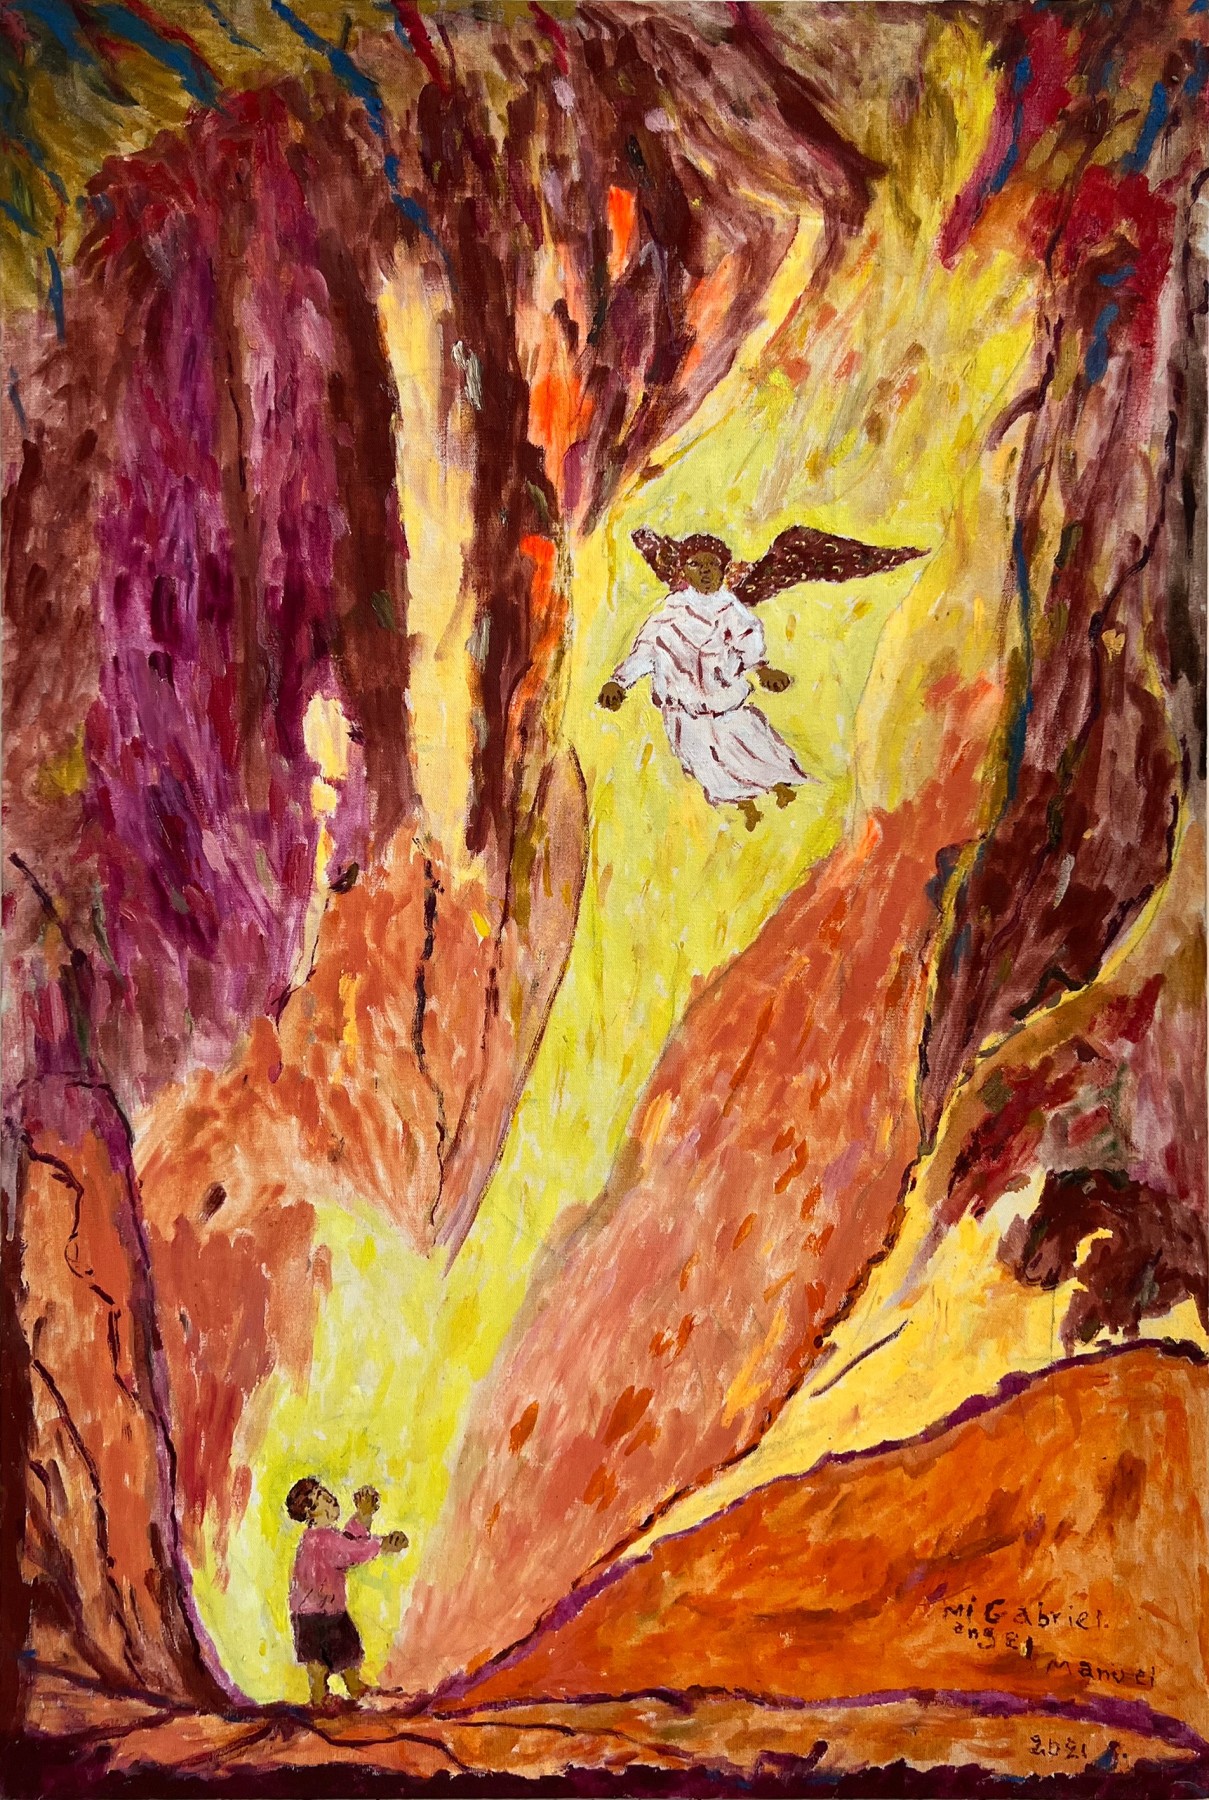 I painted a man in a cave who had a vision of Gabriel Archangel.